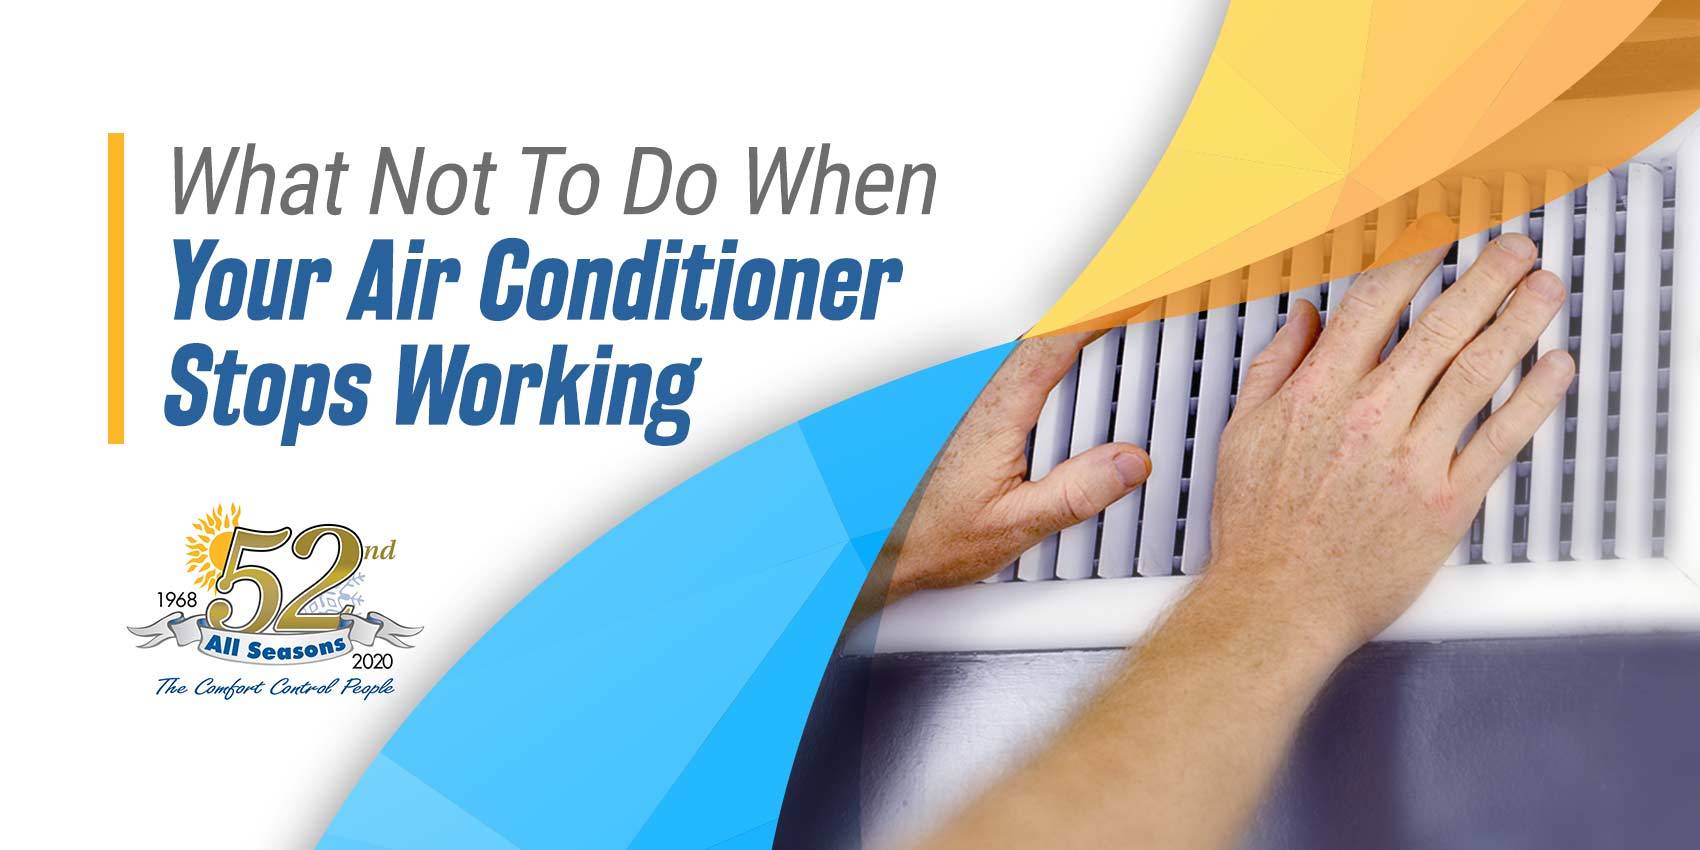 What Not To Do When Your Air Conditioner Stops Working